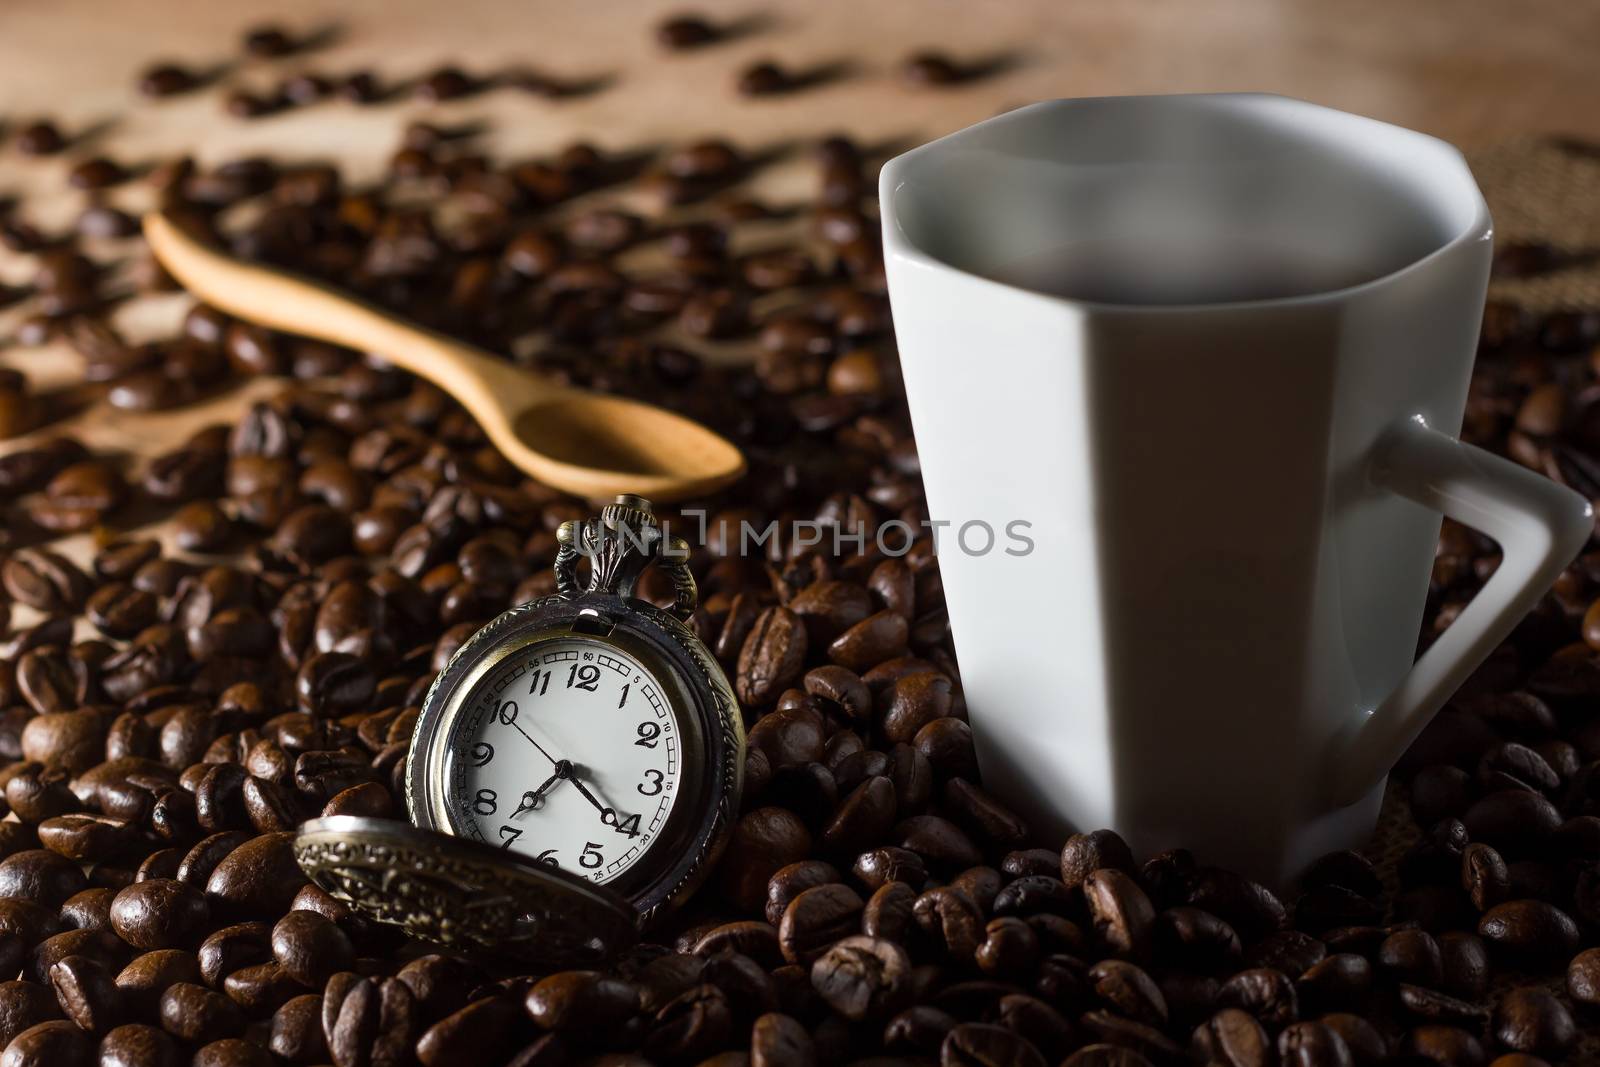 Low key coffee in the darkness. Roasted coffee beans on a wooden table with a glass of white ceramic and a wooden spoon placed behind an old watch.